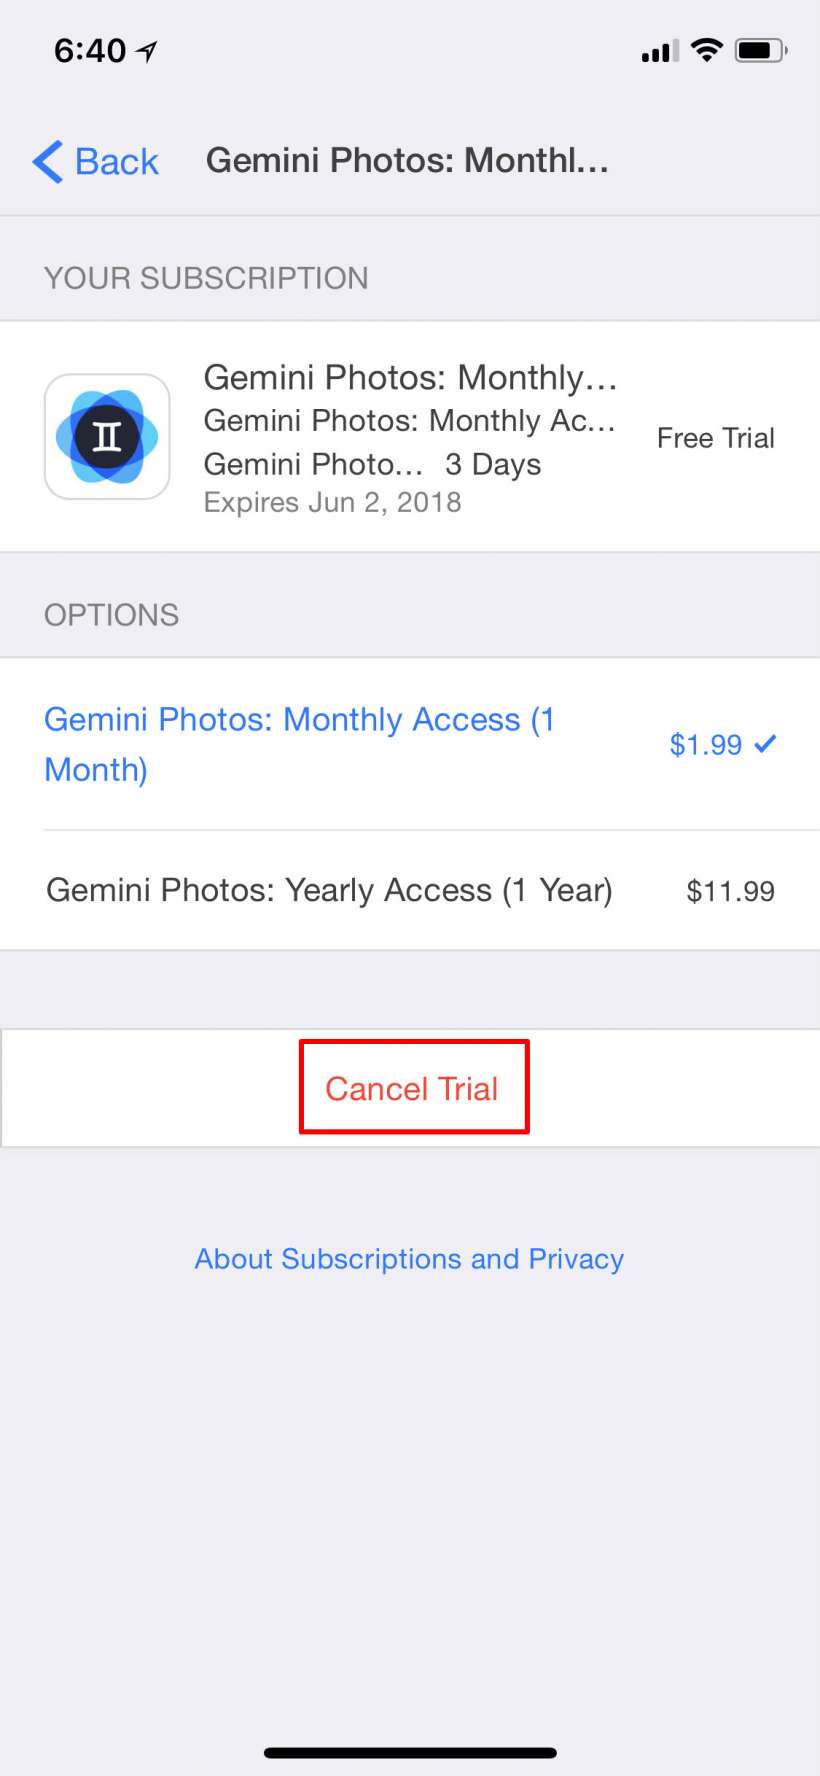 How to easily clean up duplicate, blurry and other clutter photos from iPhone camera roll with Gemini.